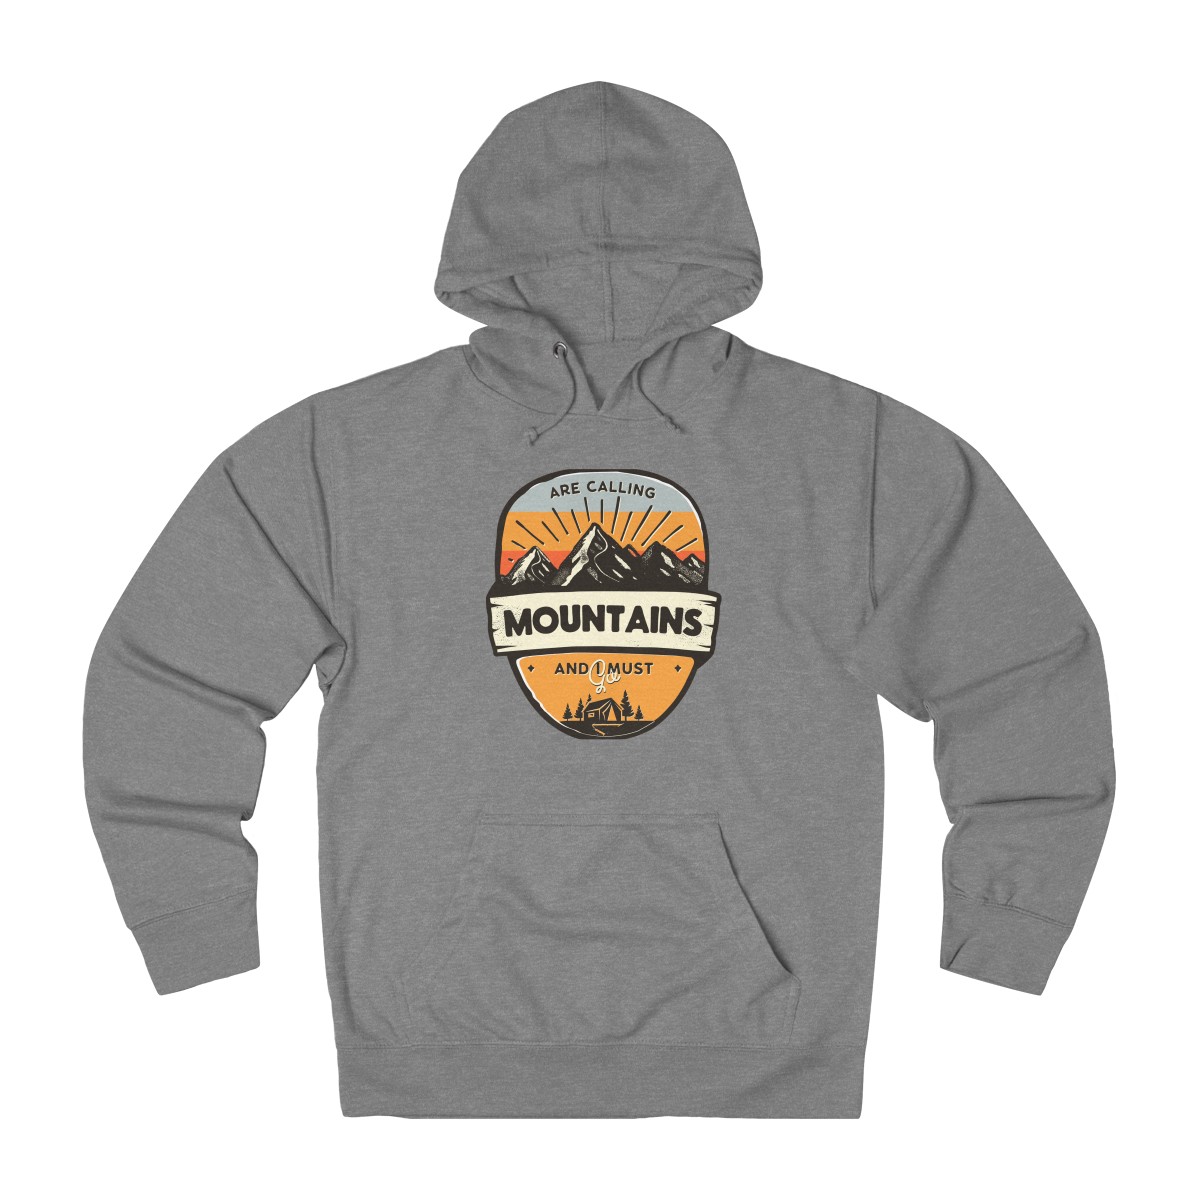 Featured image for “Mountains Are Calling - Unisex Hoodie”